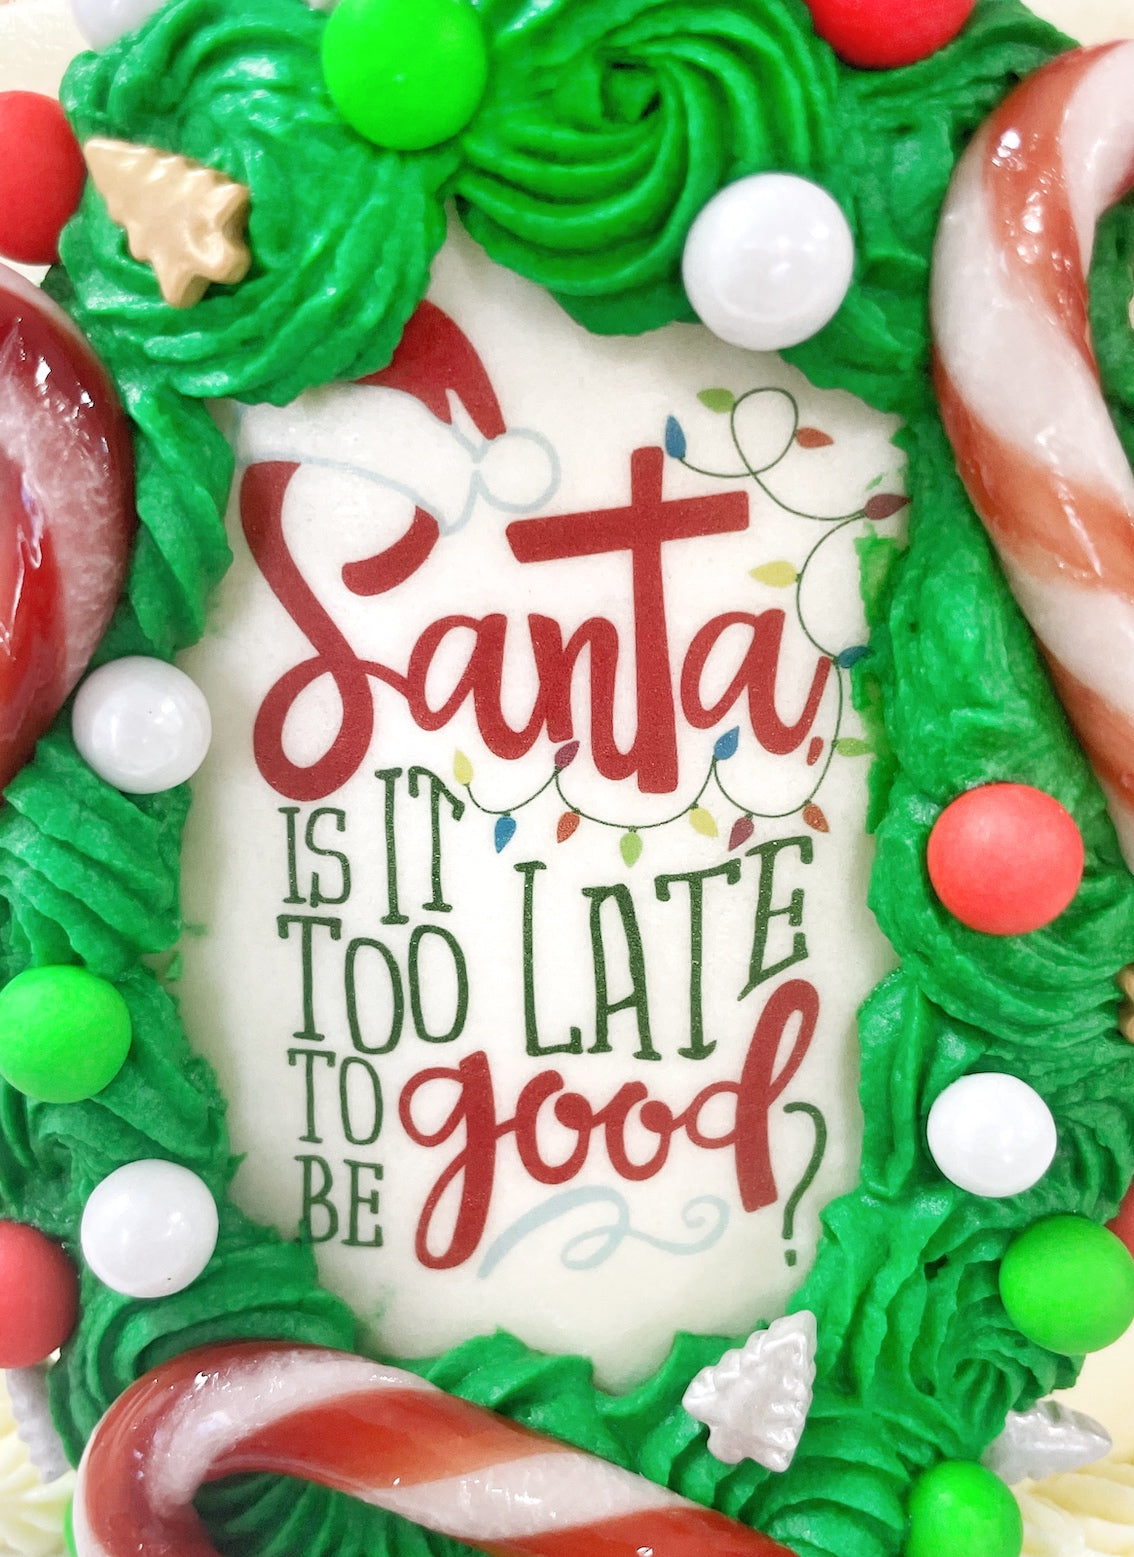 Santa is it too late to be good Edible Image, Cake decoration edible wafer